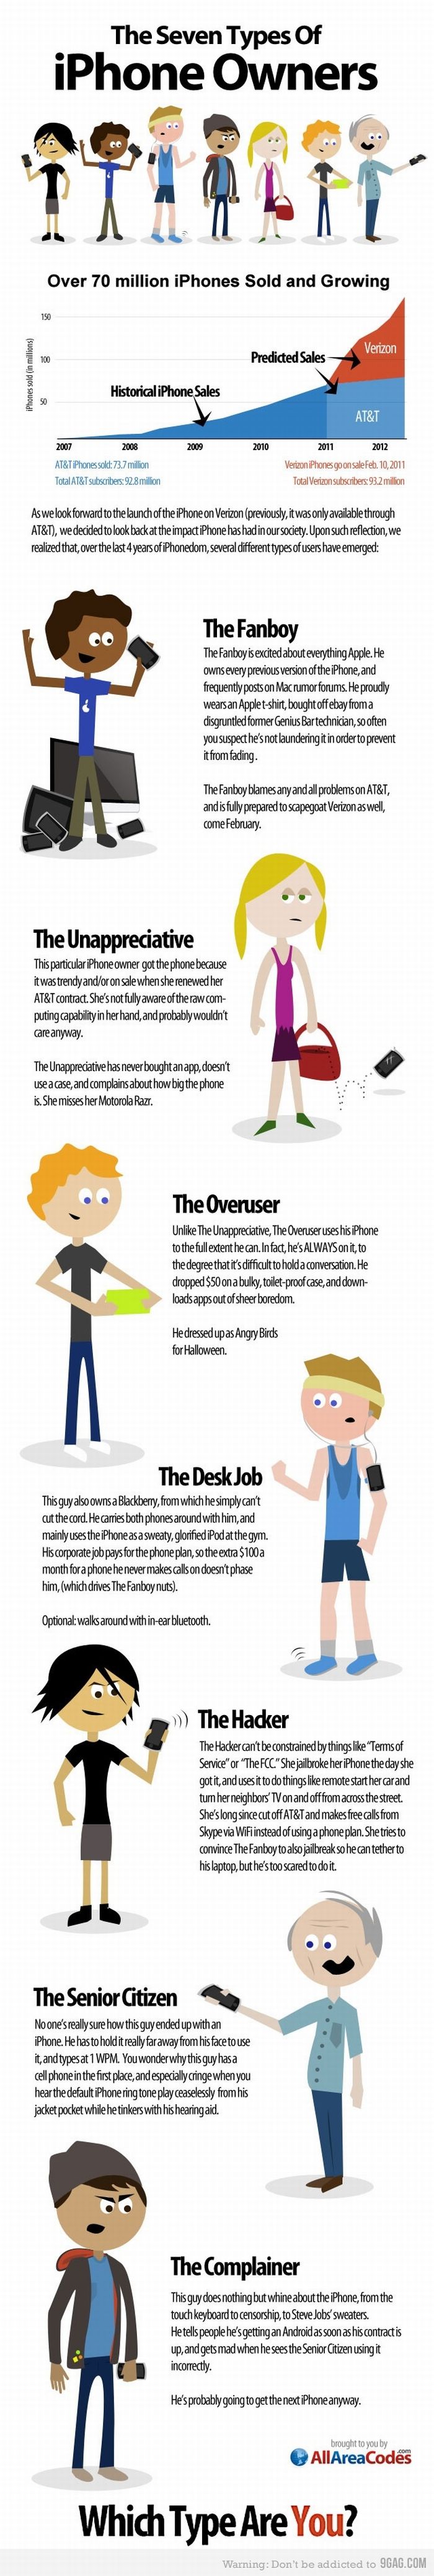 The Seven Types of iPhone Owners (infographic)